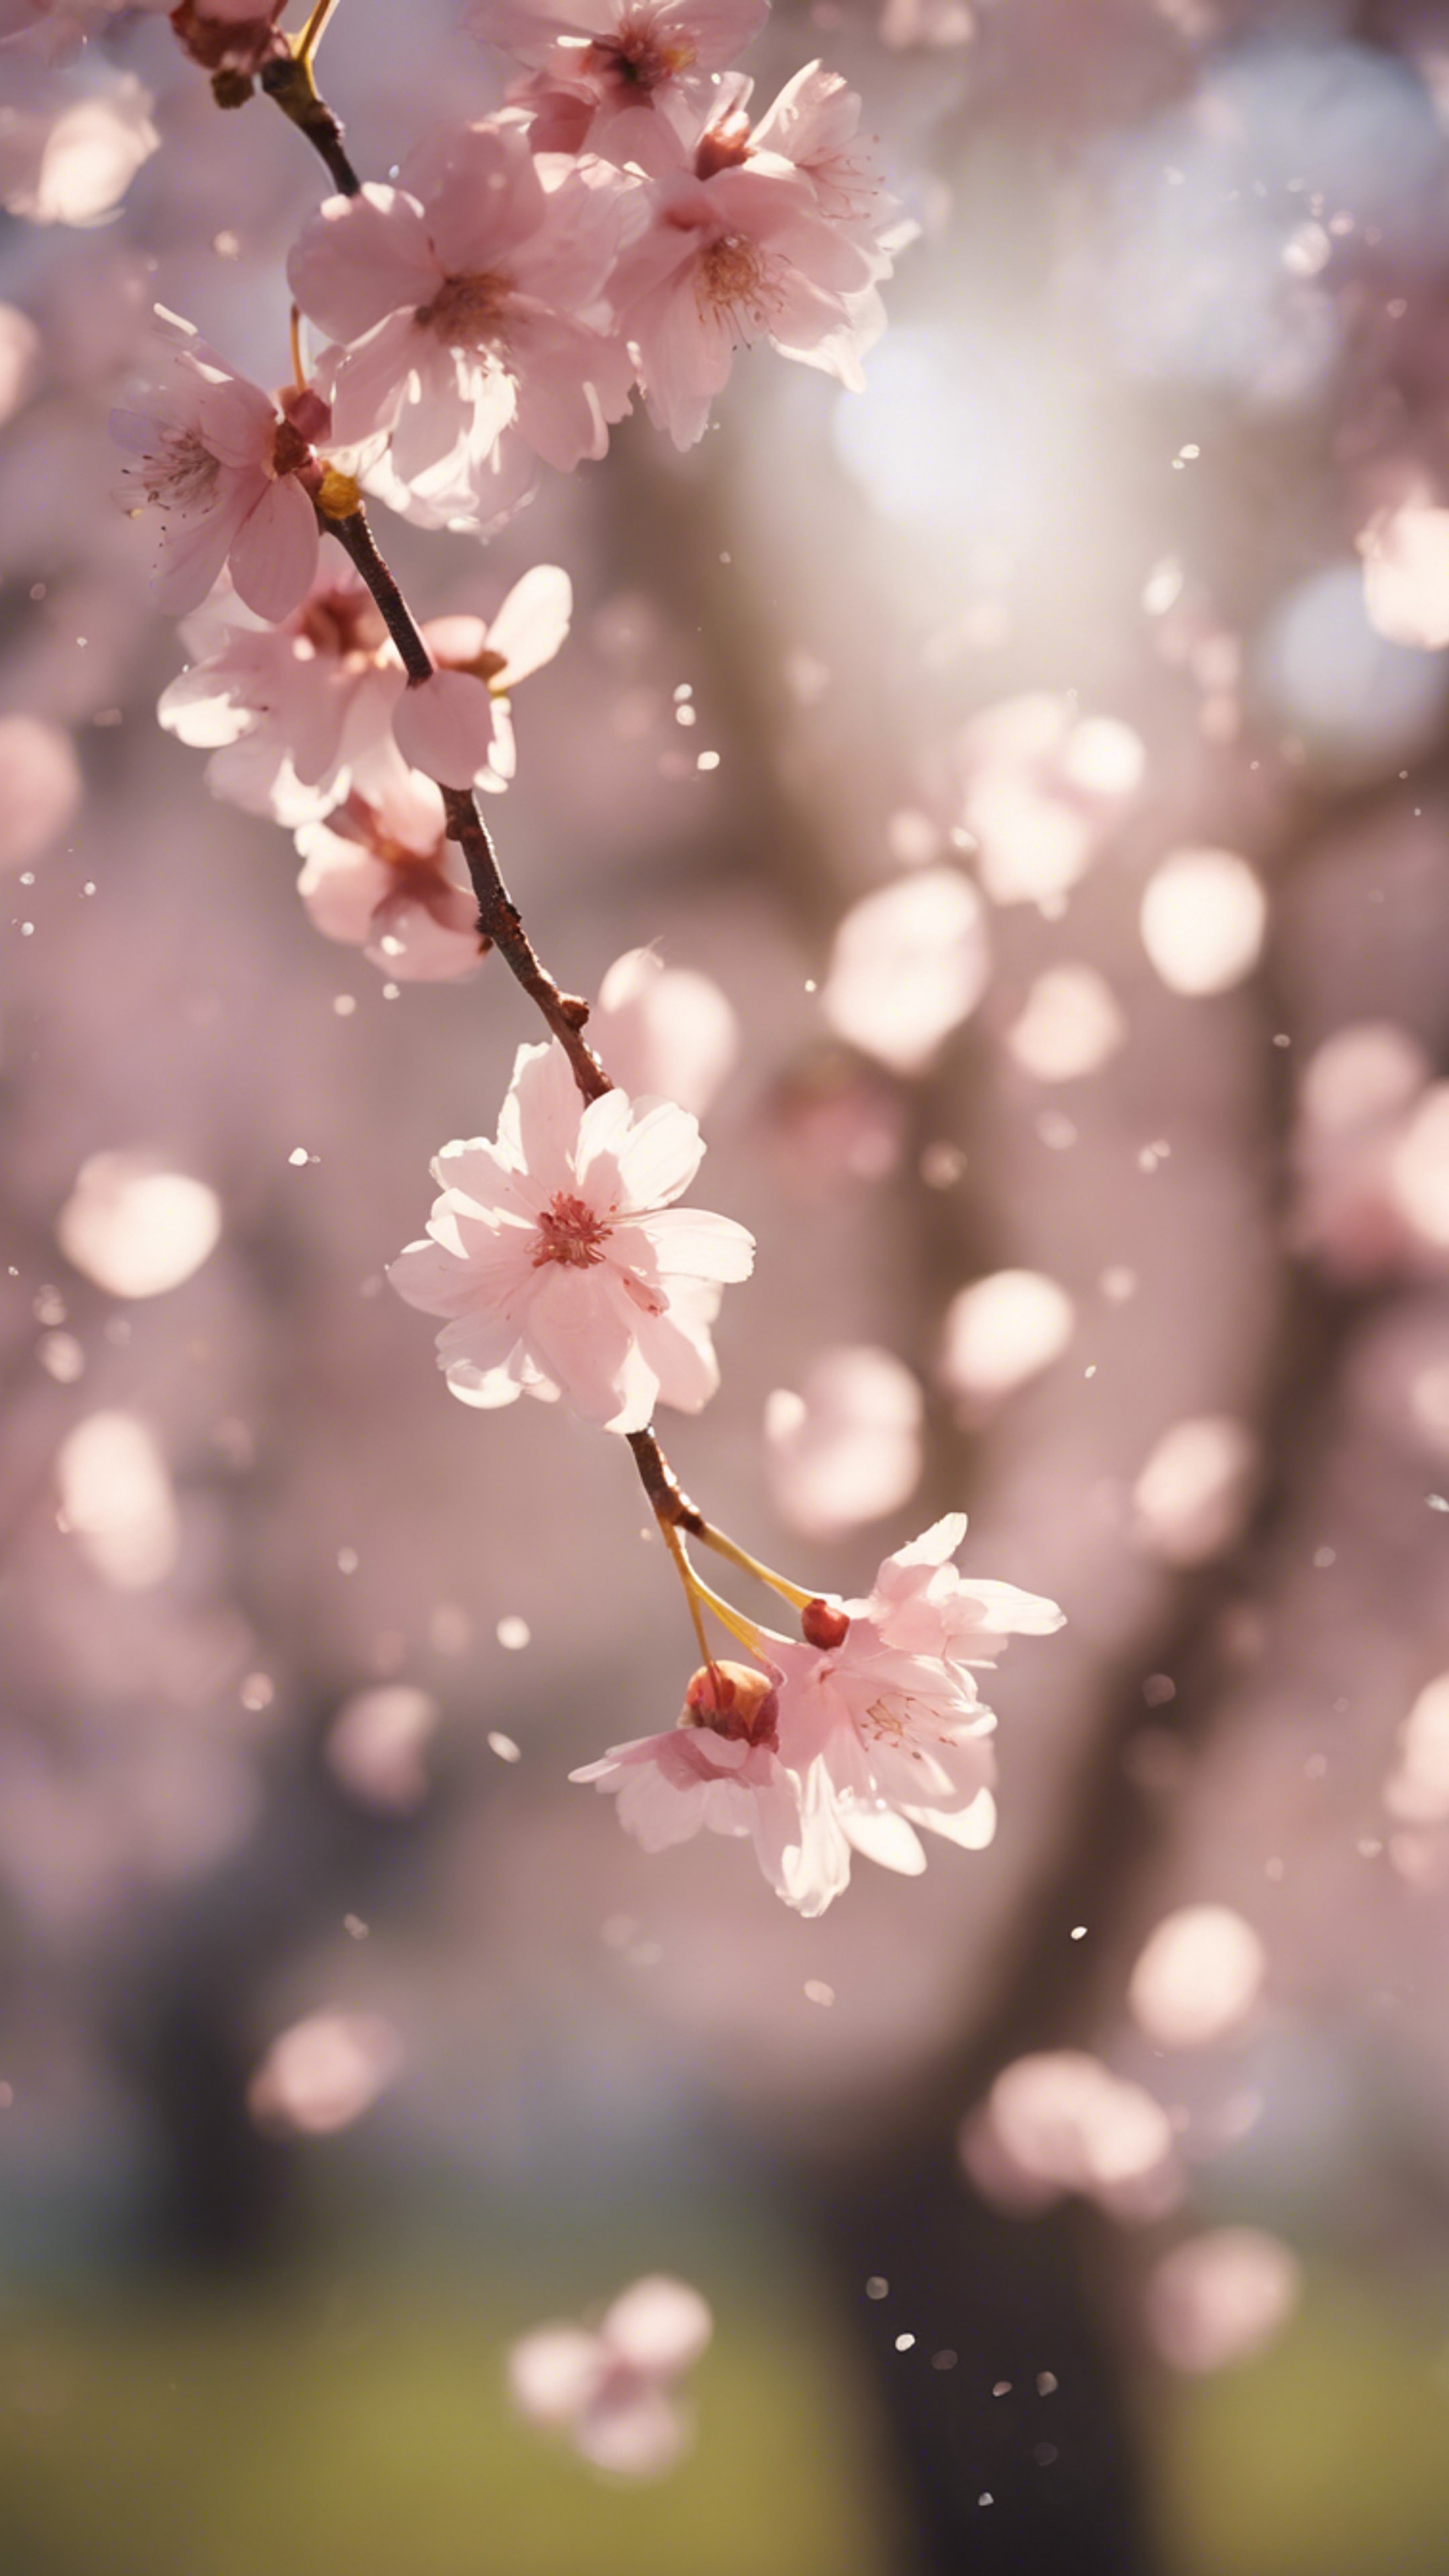 Tiny, light pink cherry blossom petals falling gently from a tree in the morning light. Fond d'écran[bcff163445454d48bfbe]